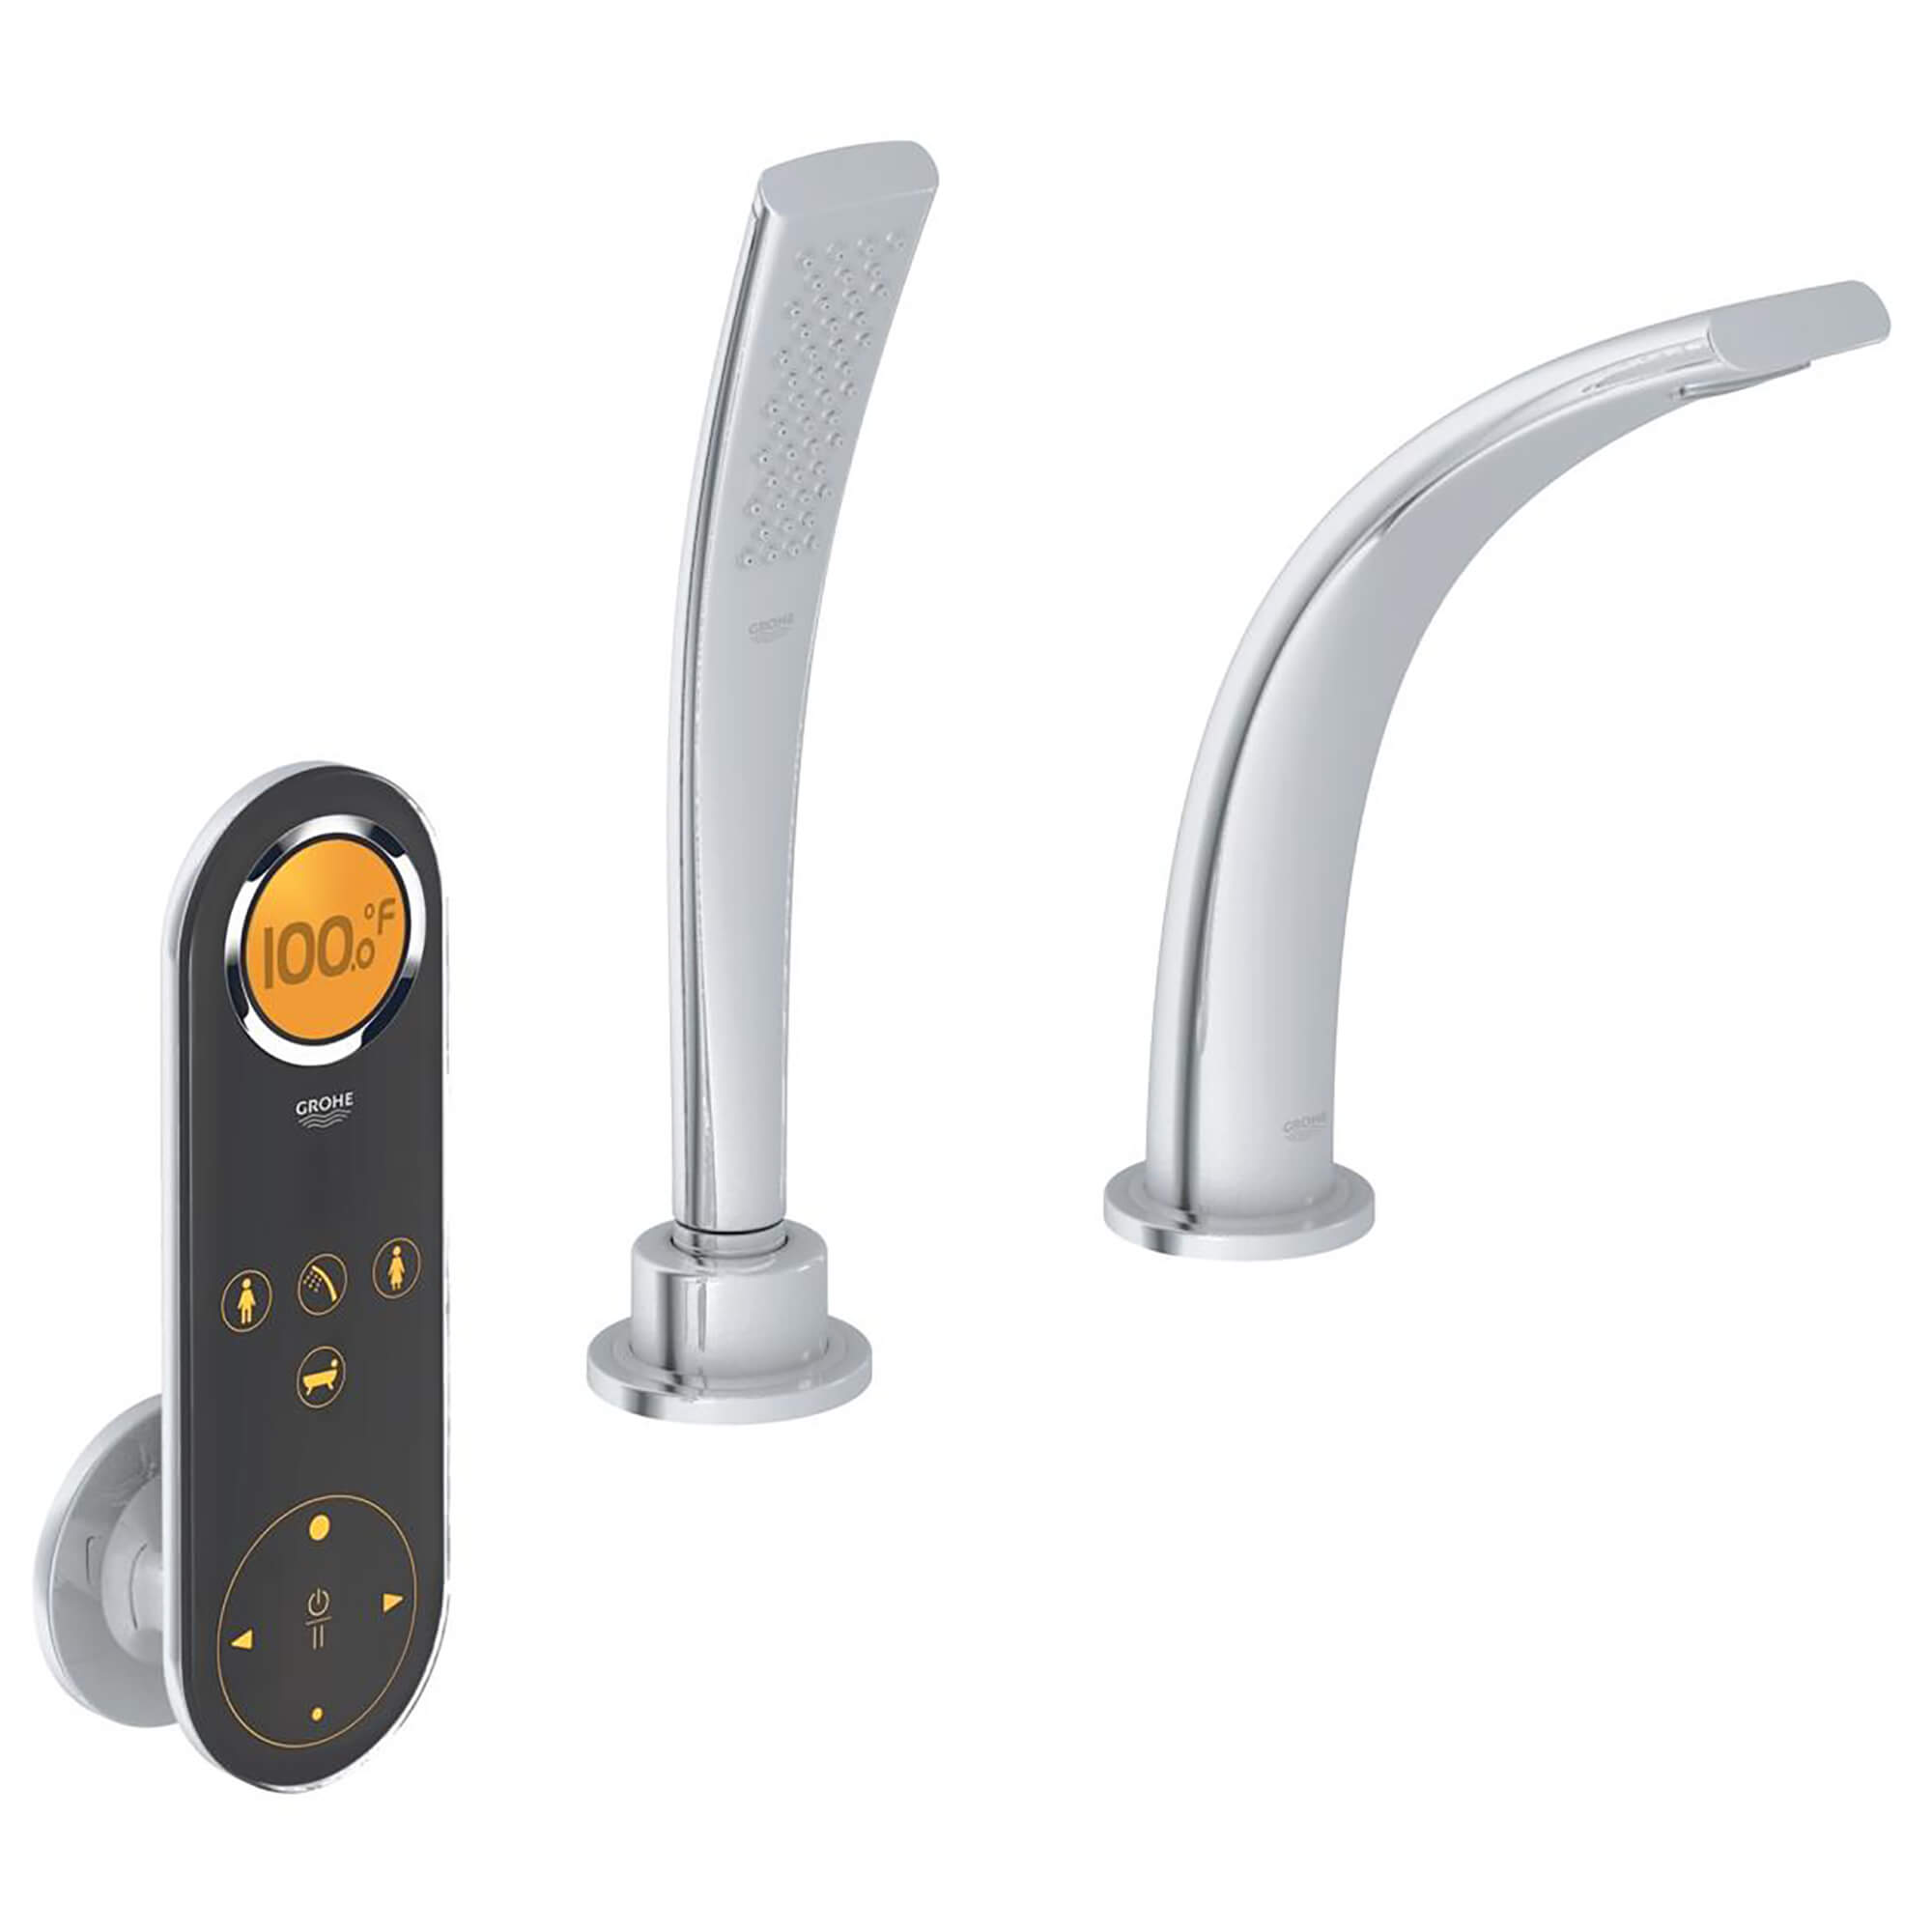 Ondus Bath Digital automatic faucets by Grohe